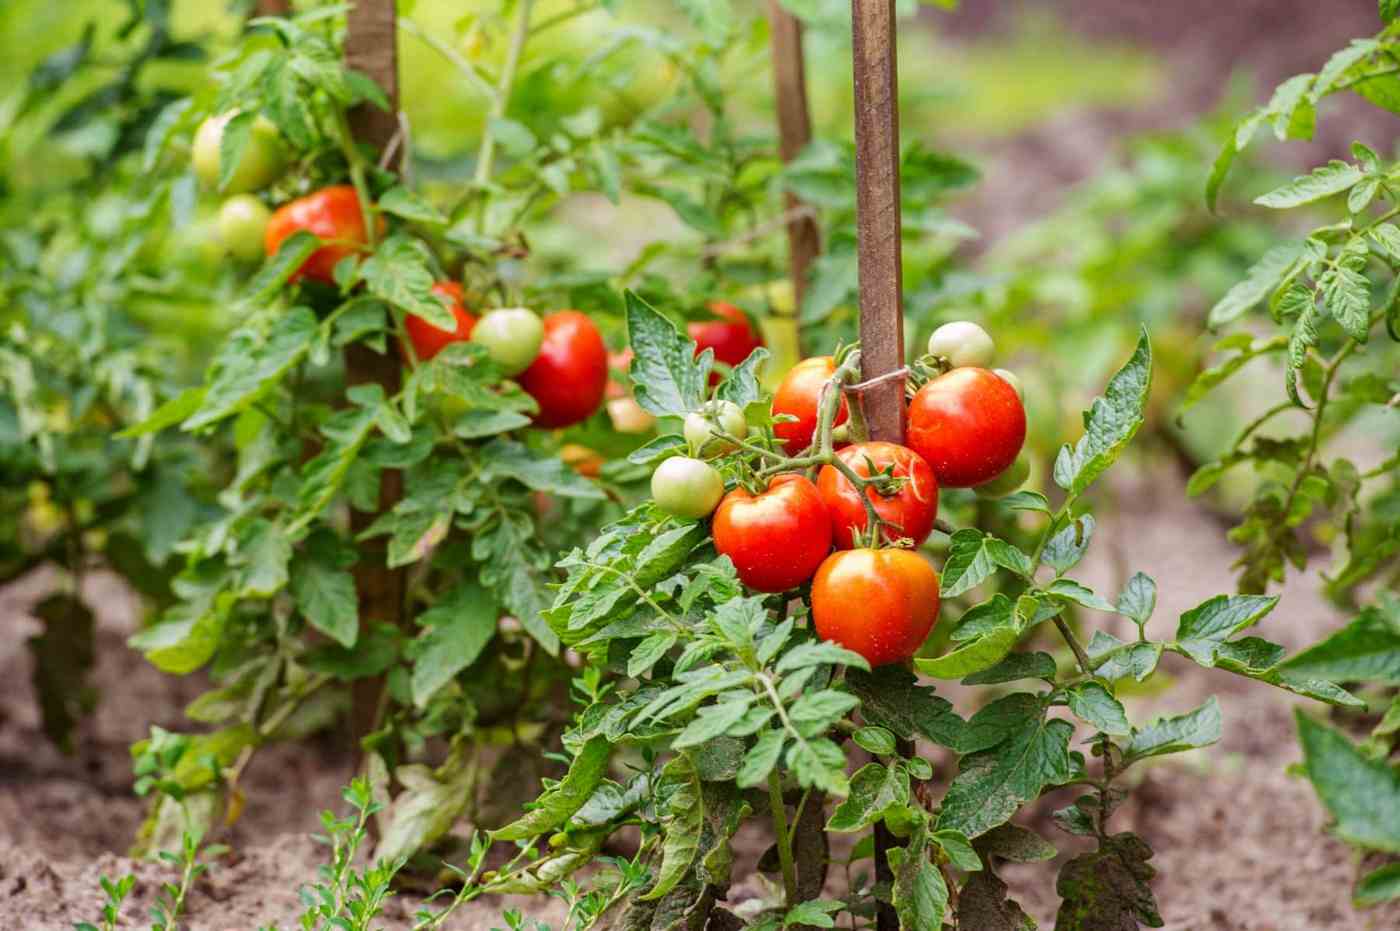 Tomatoes and bean plants do not smell scents from flying insects